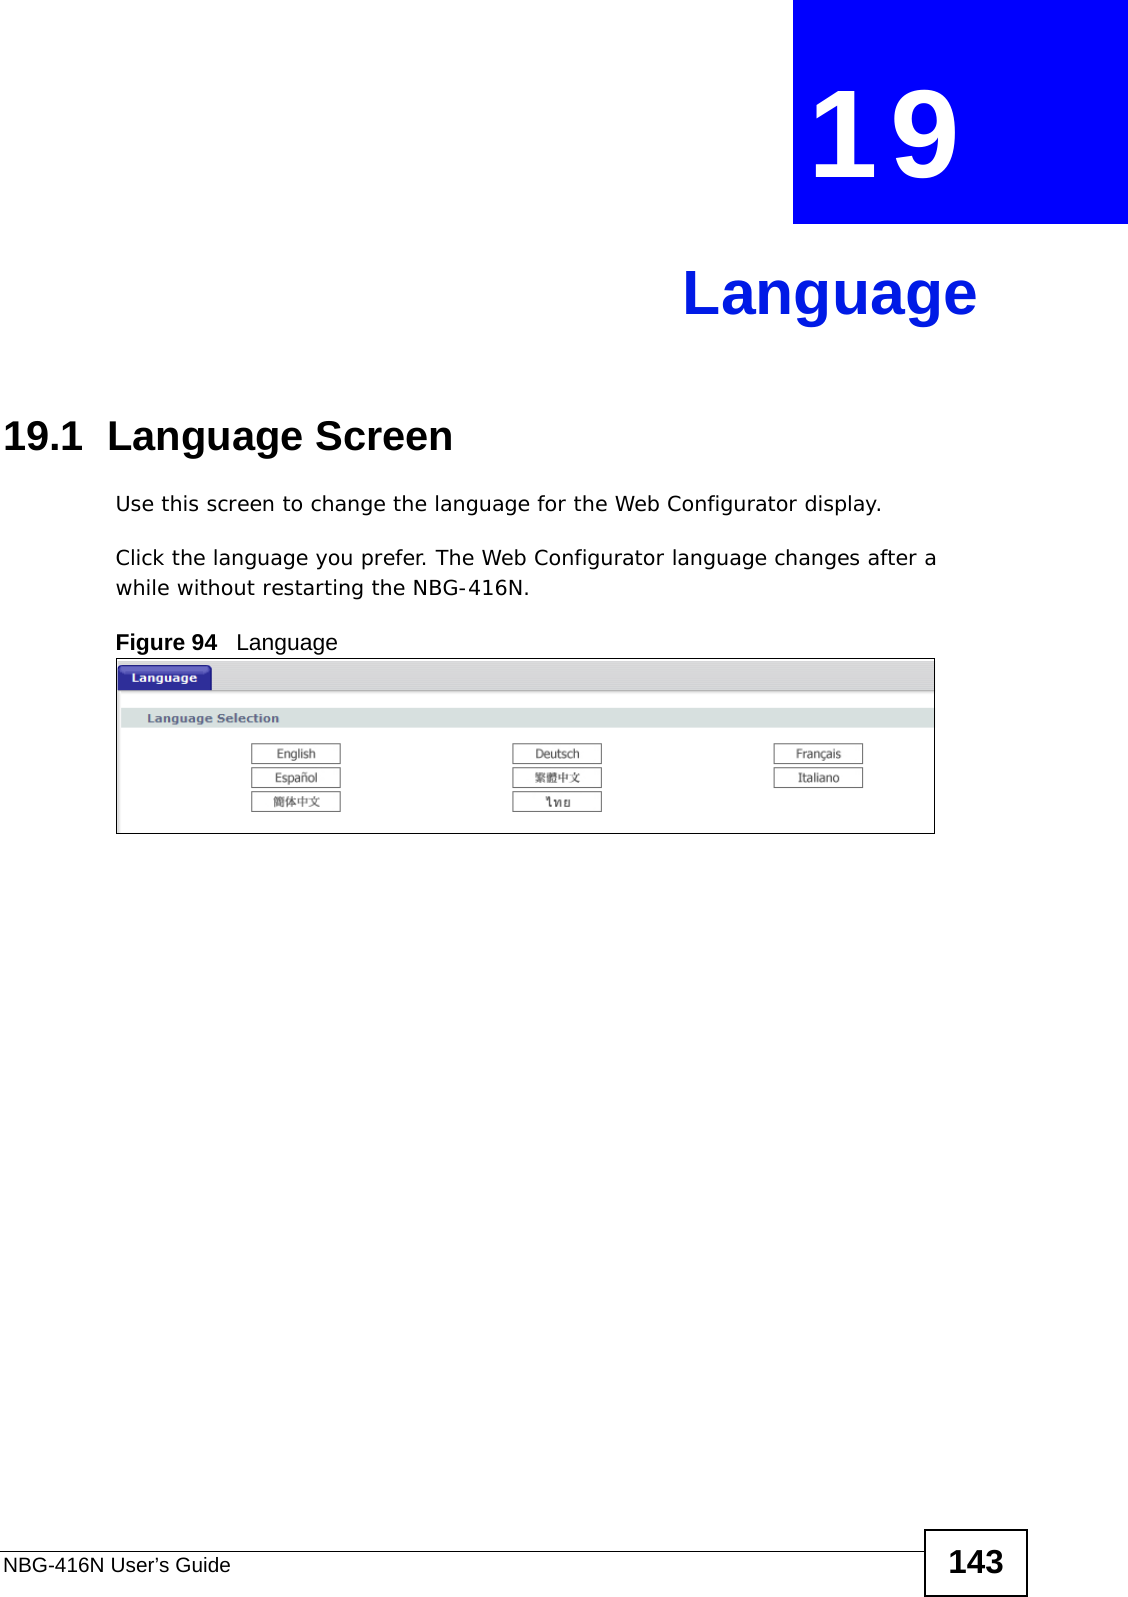 NBG-416N User’s Guide 143CHAPTER  19 Language19.1  Language ScreenUse this screen to change the language for the Web Configurator display.Click the language you prefer. The Web Configurator language changes after a while without restarting the NBG-416N.Figure 94   Language